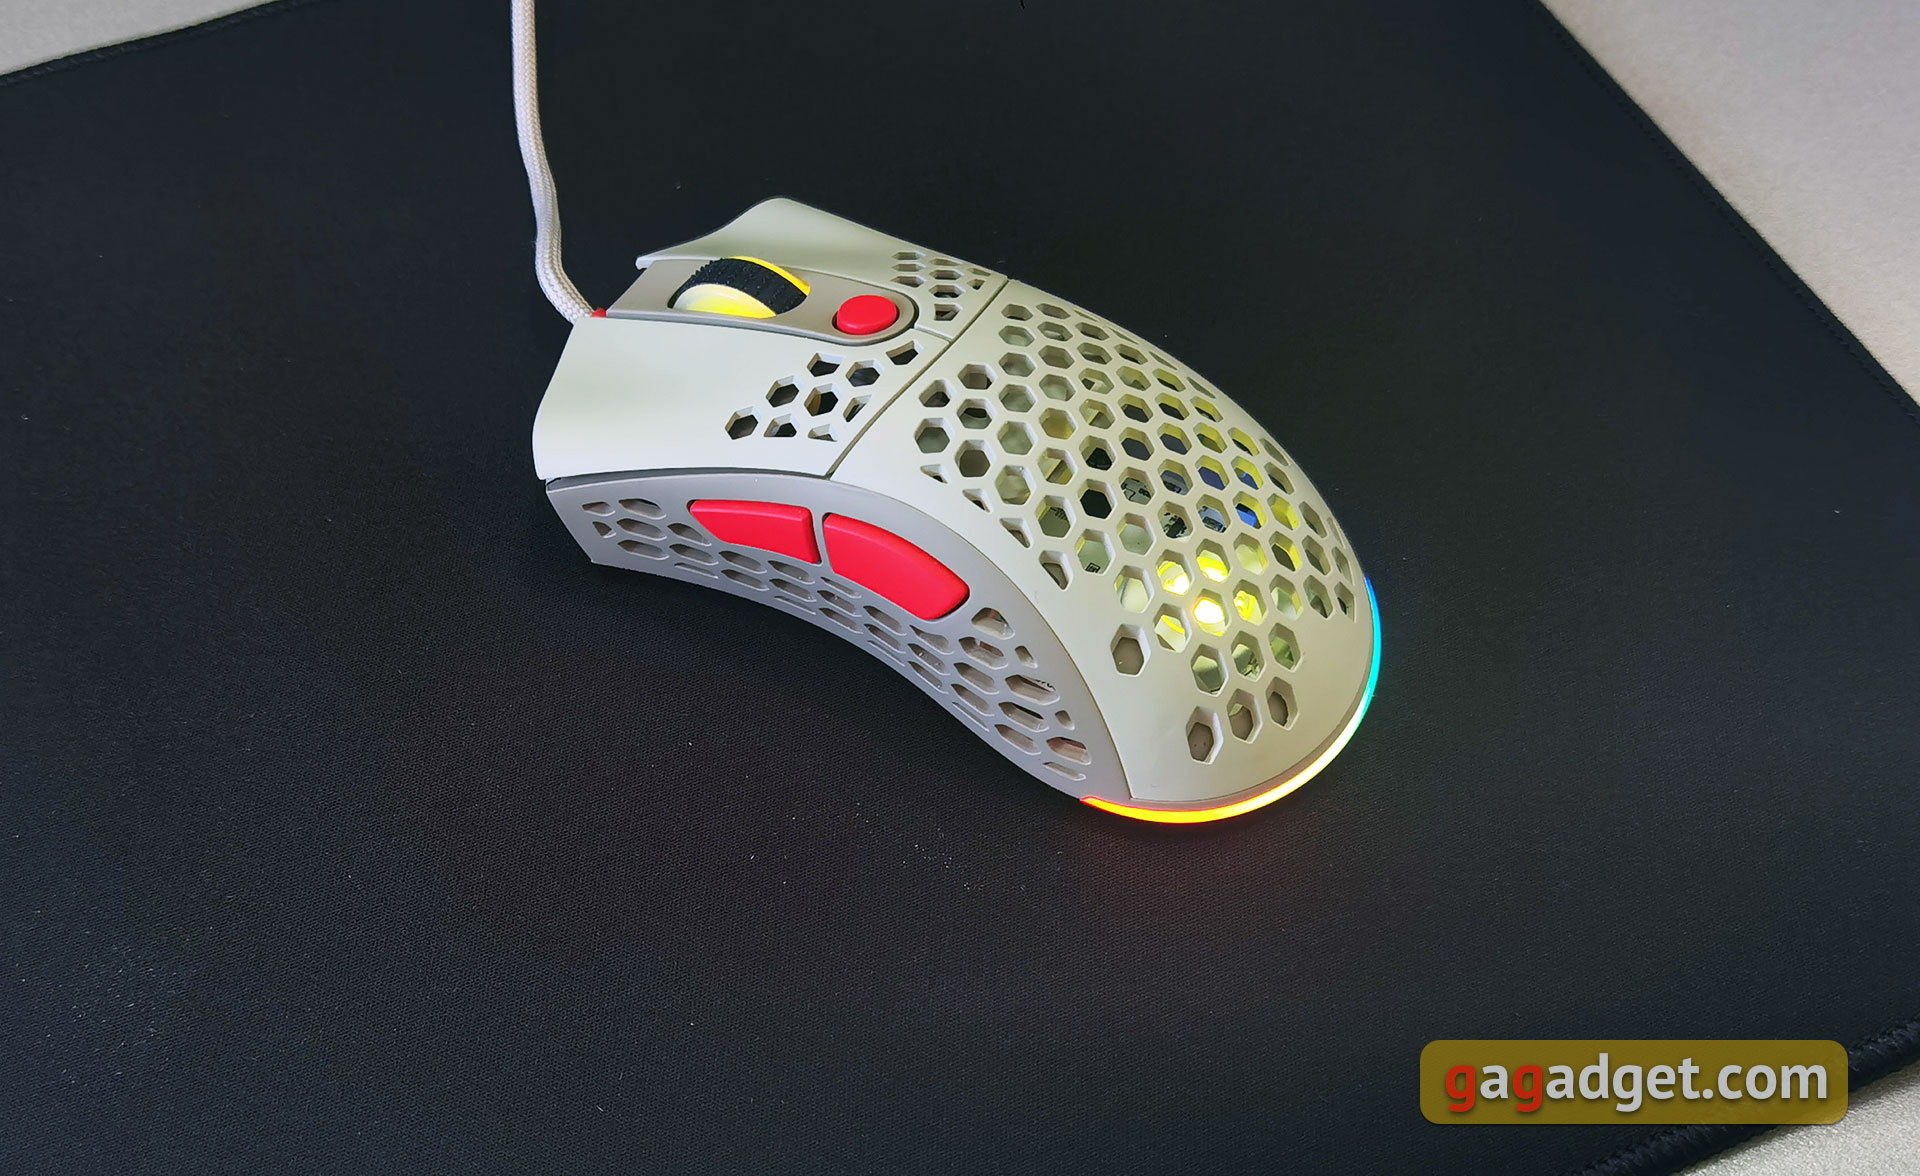 2E Gaming HyperSpeed ​​Pro review: Lightweight gaming mouse with great sensor